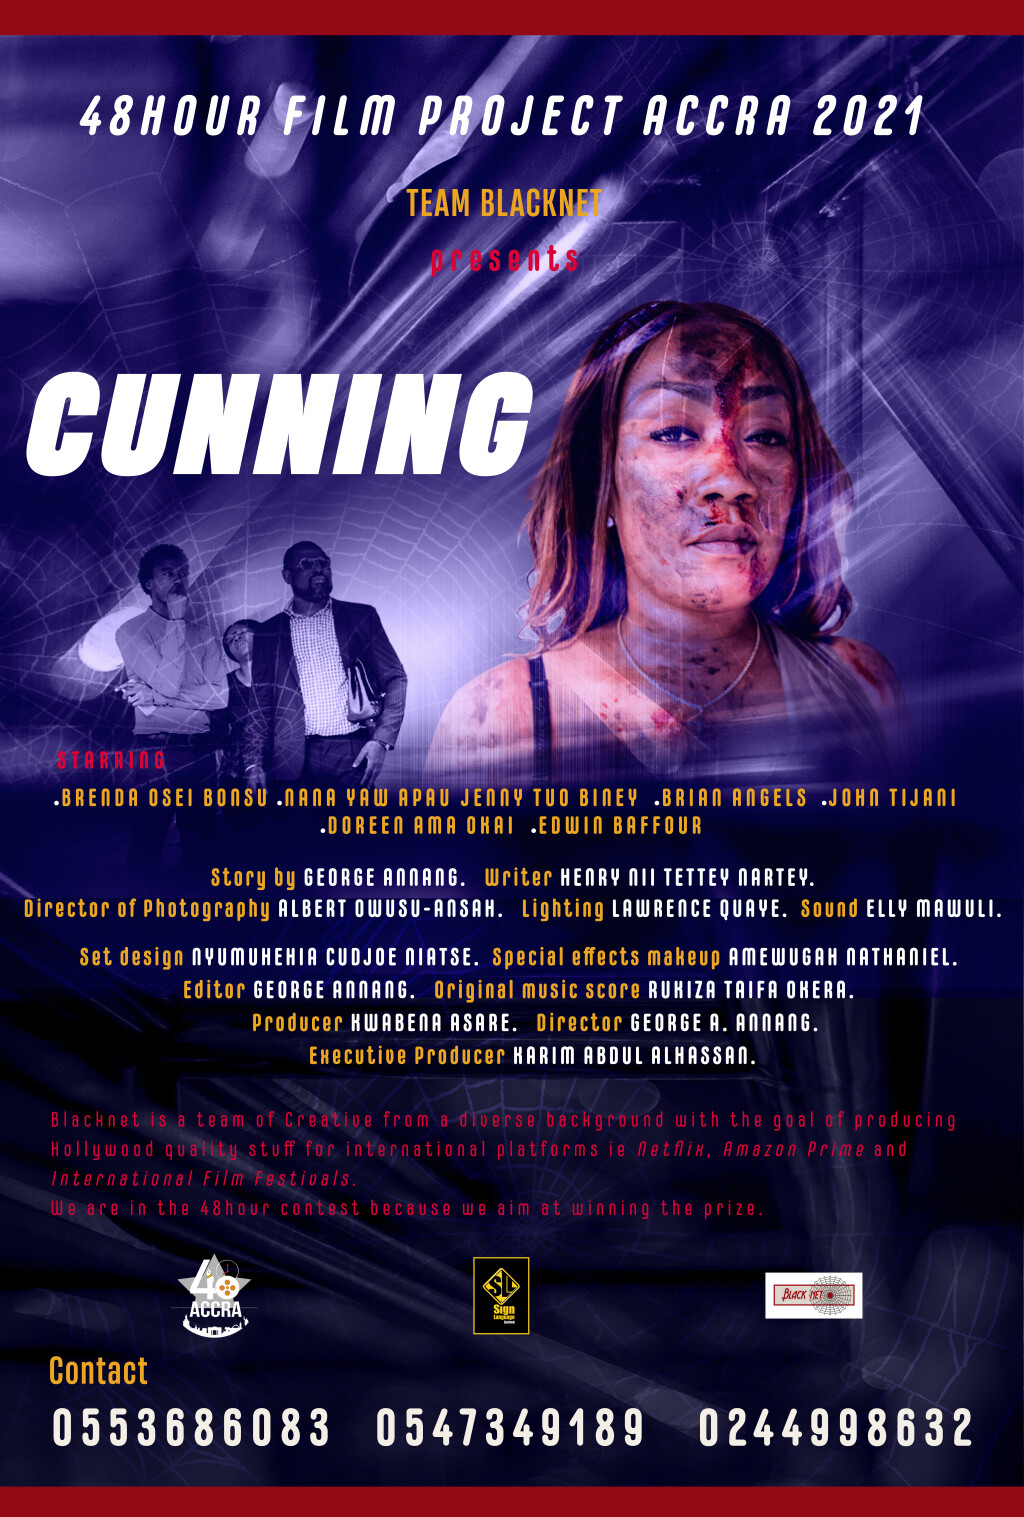 Filmposter for CUNNING